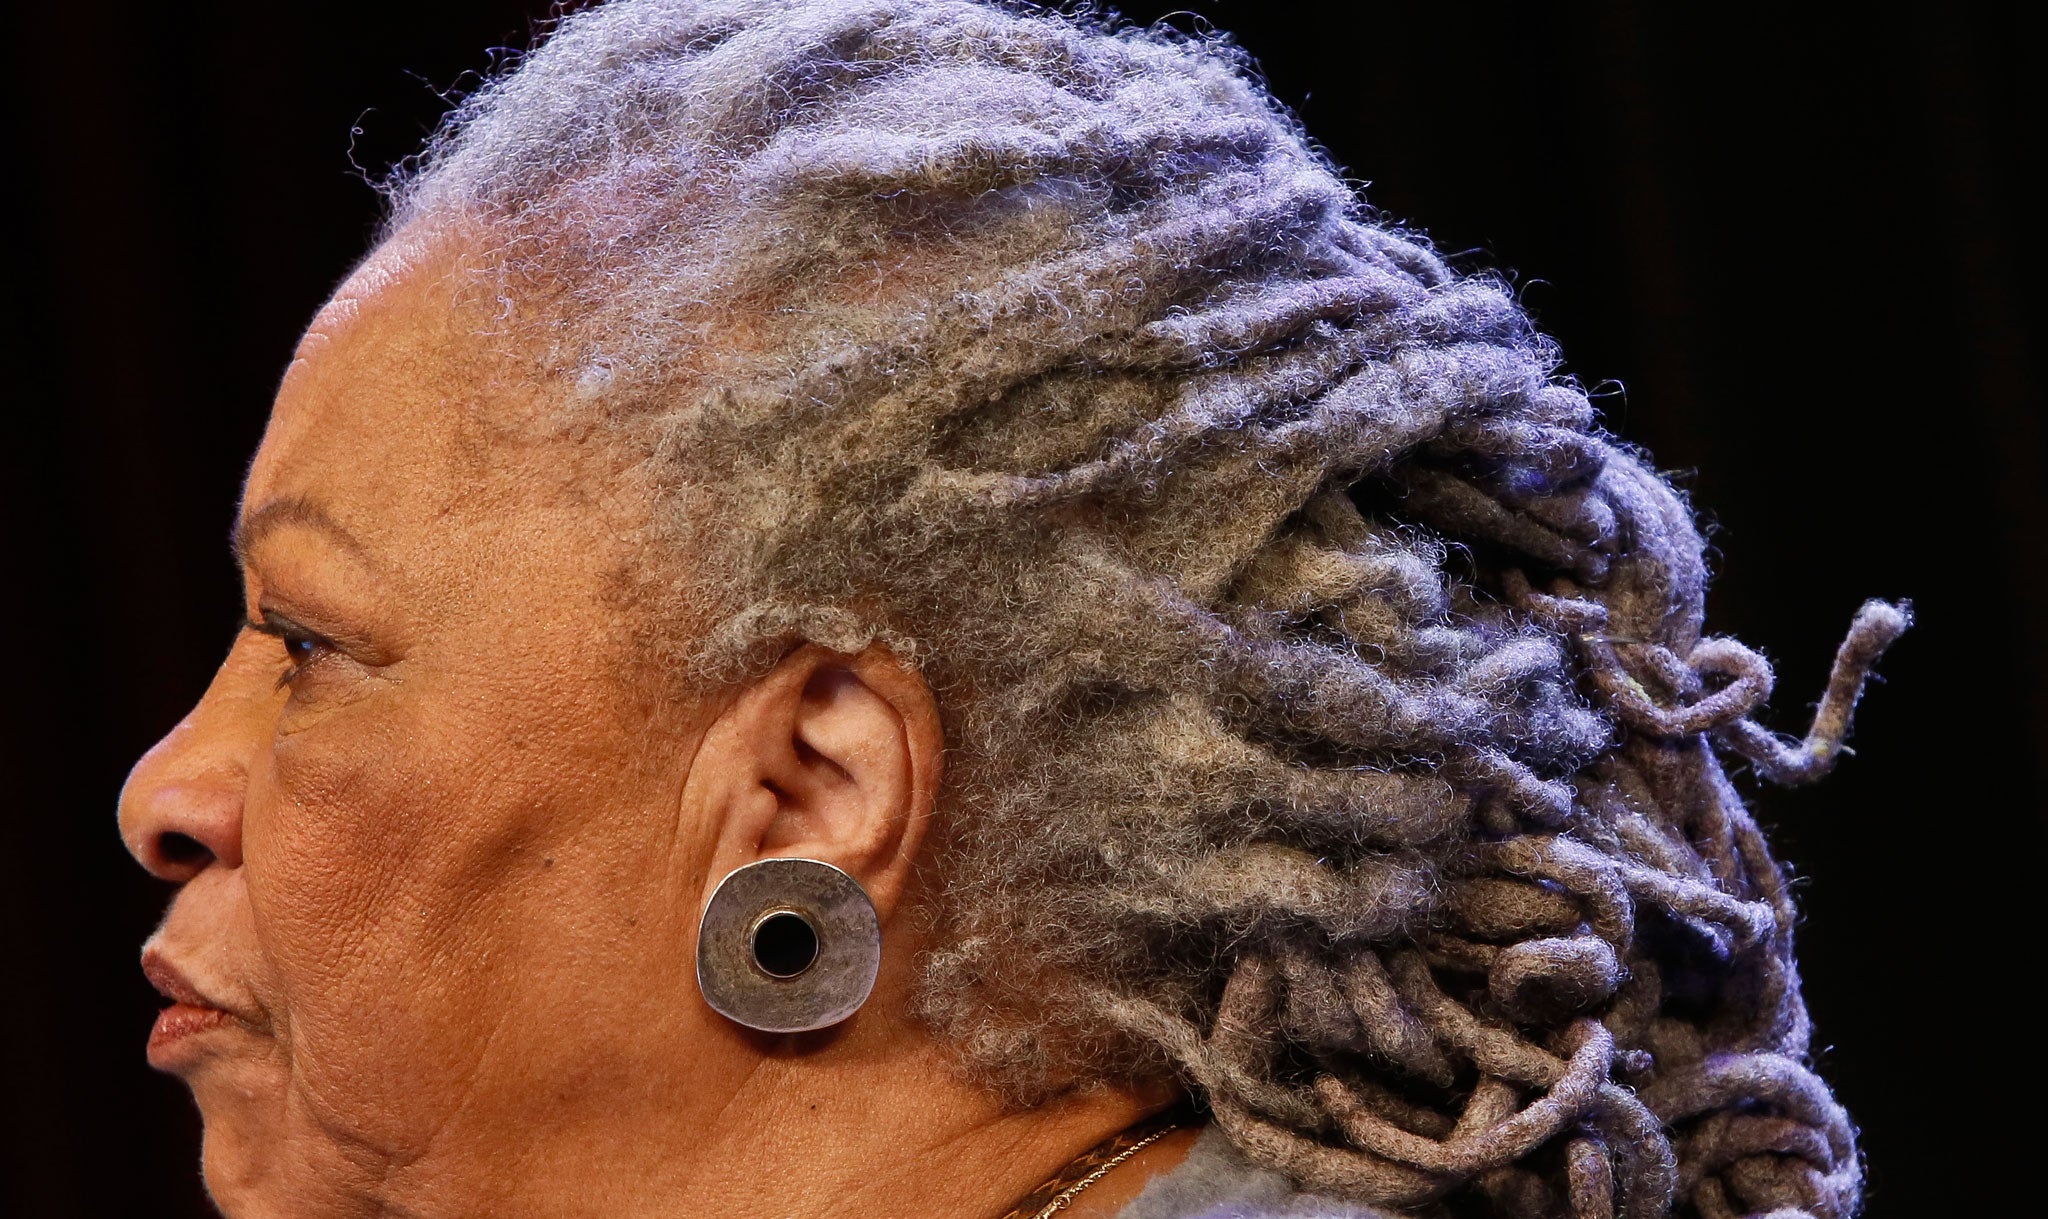 Confronting the big subjects: Toni Morrison